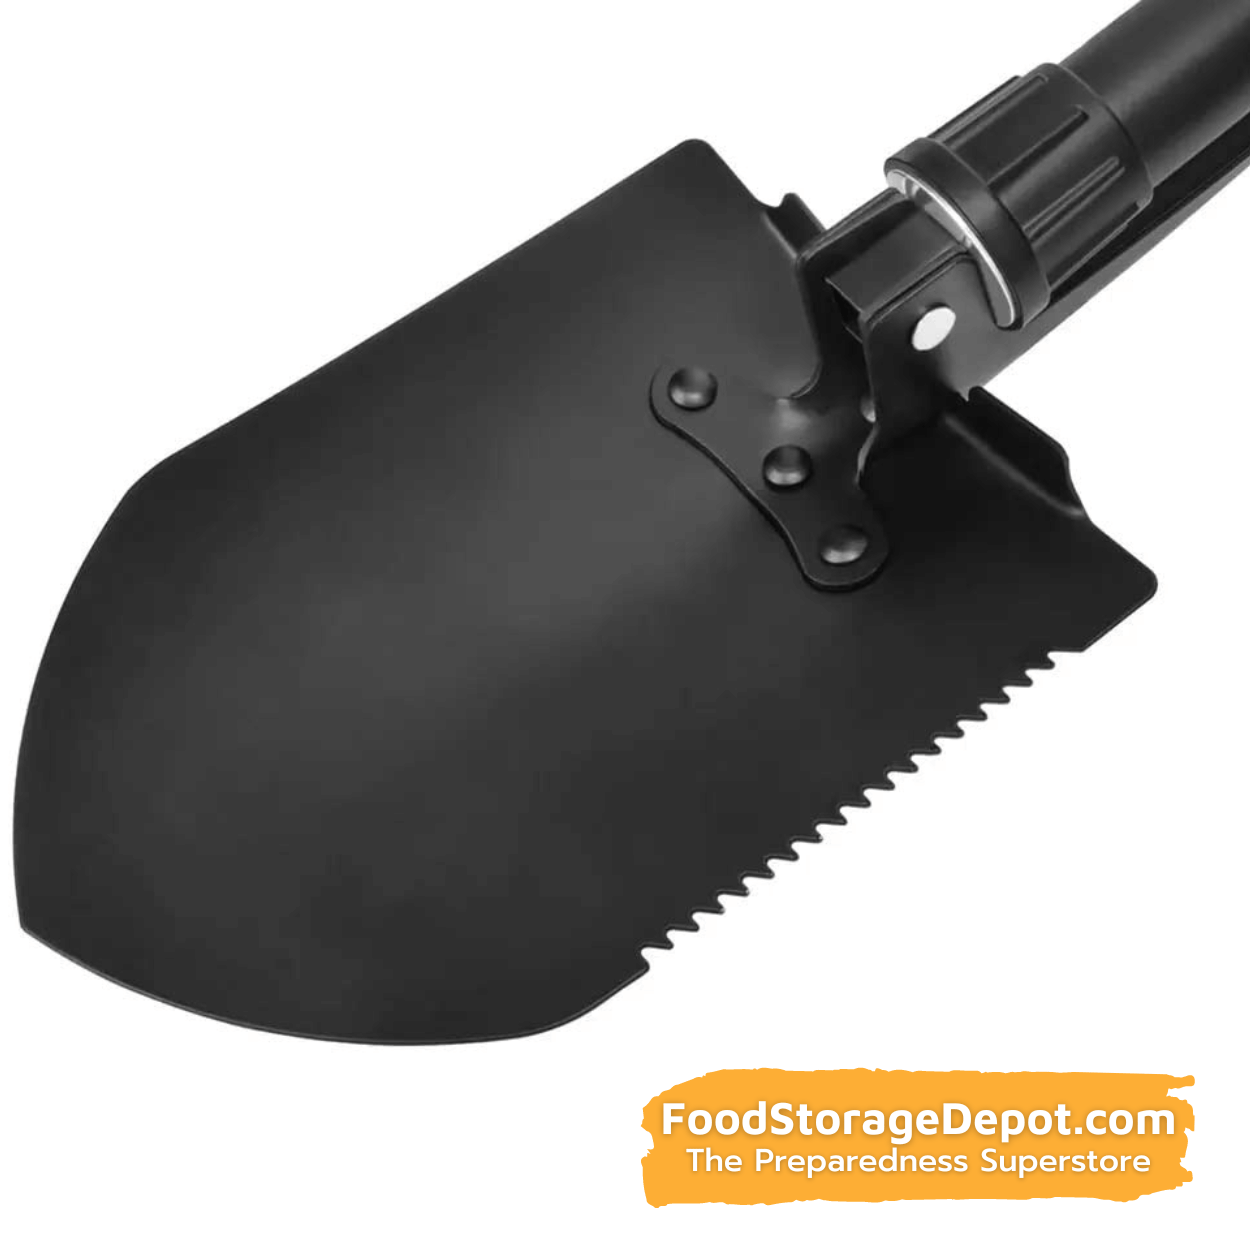 Tri-Fold Serrated Shovel with Carrying Case (23")